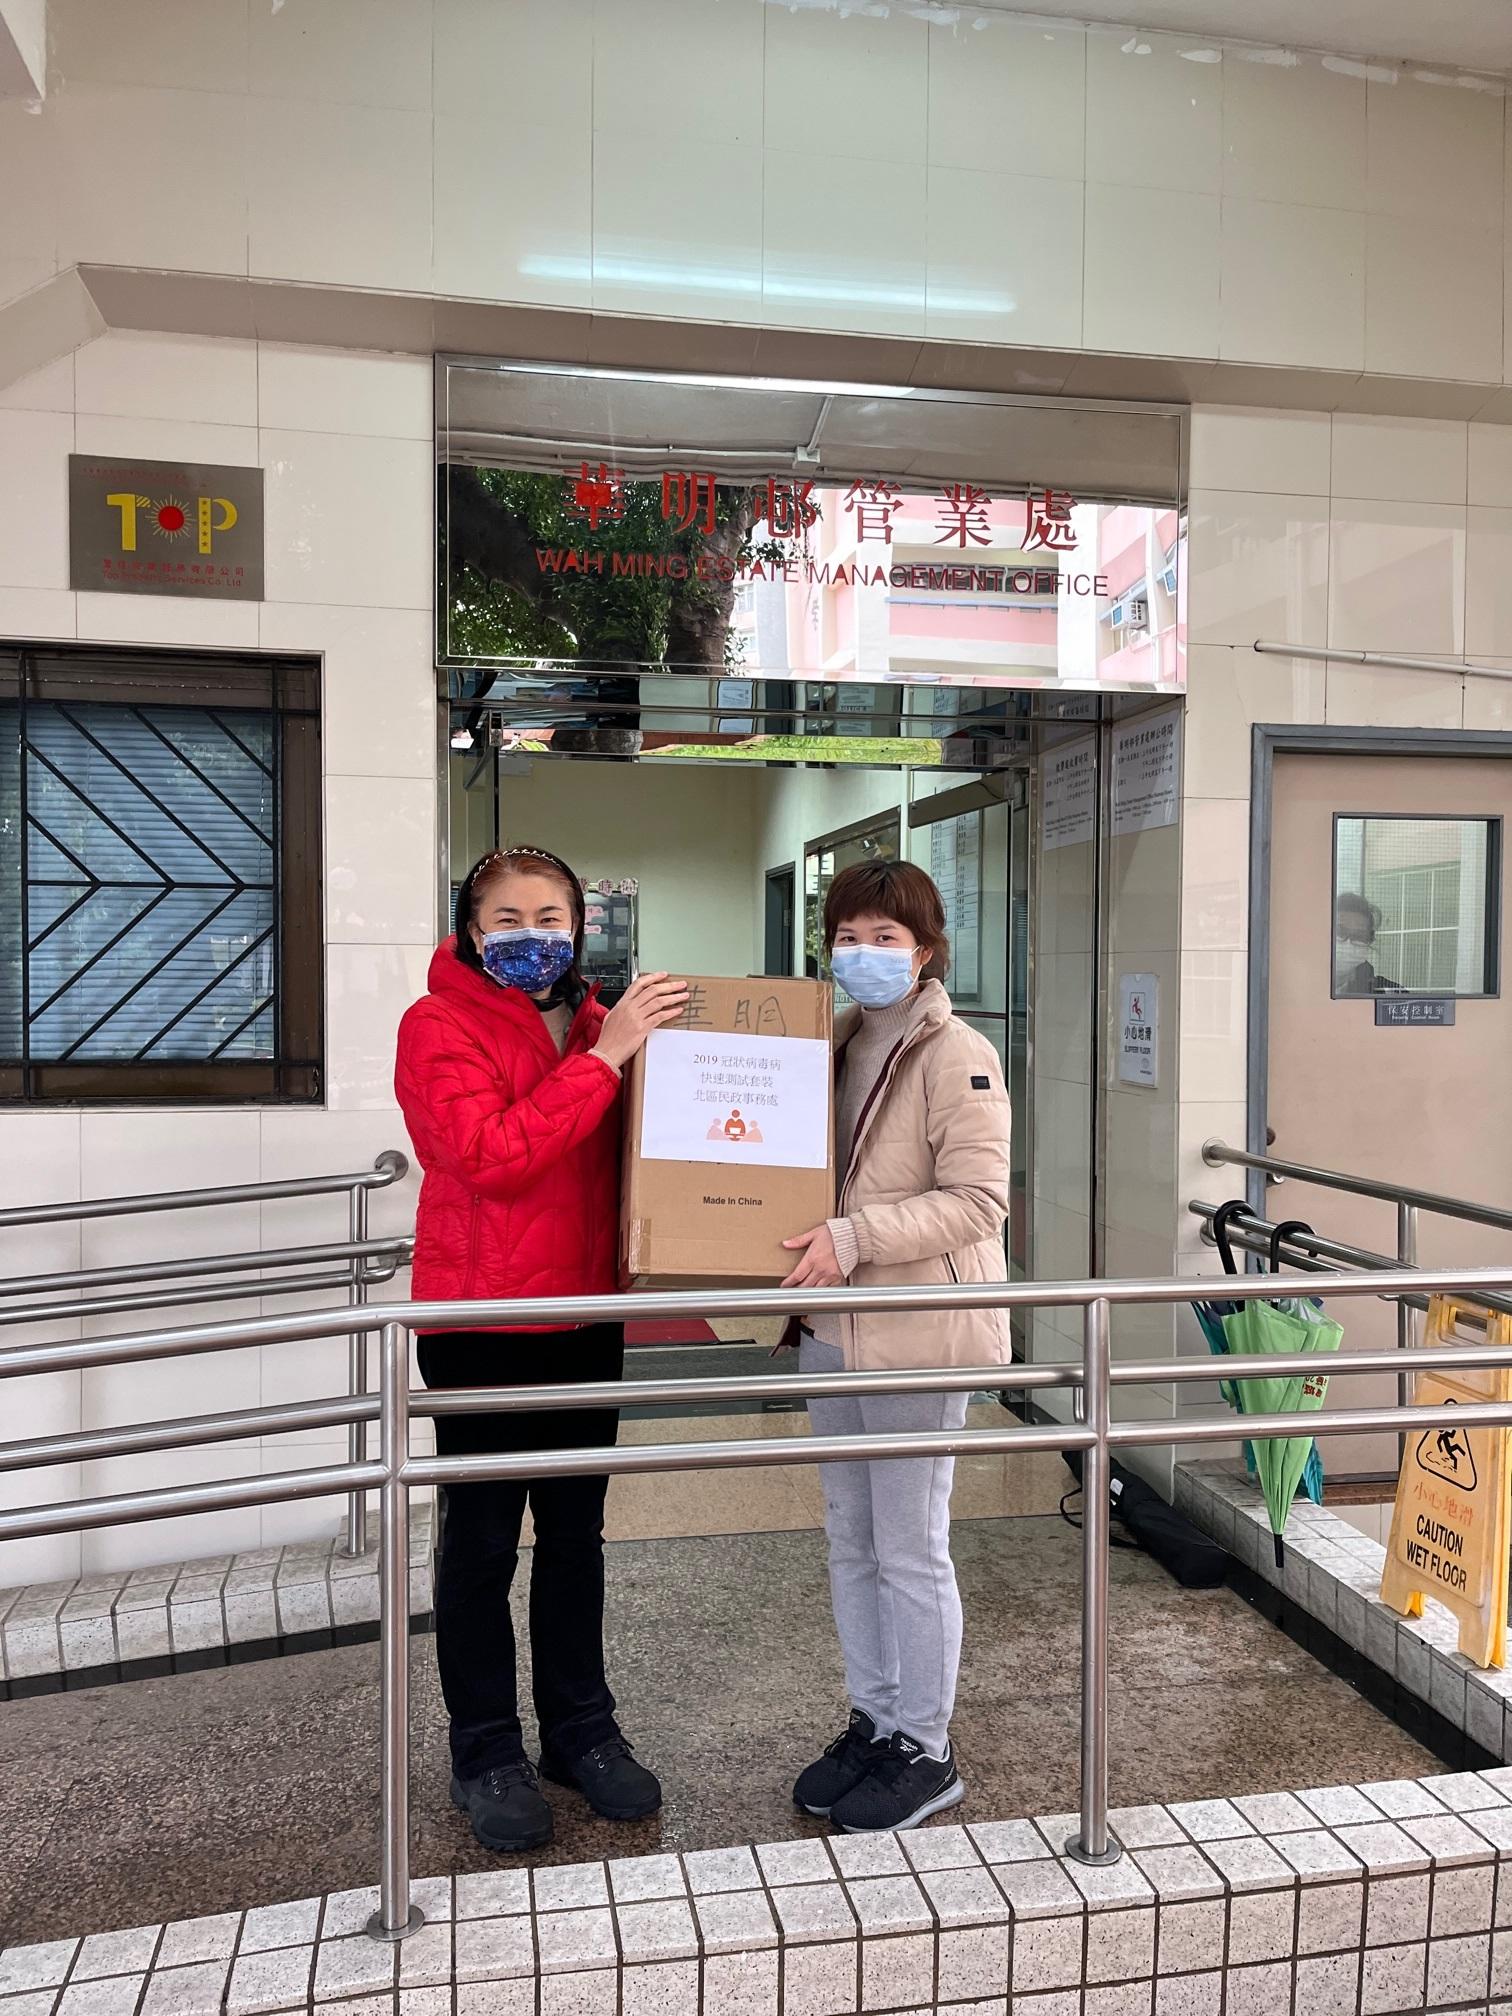 The North District Office today (February 21) distributed rapid test kits to cleansing workers and property management staff working in Wah Ming Estate for voluntary testing through the Estate's property management company.